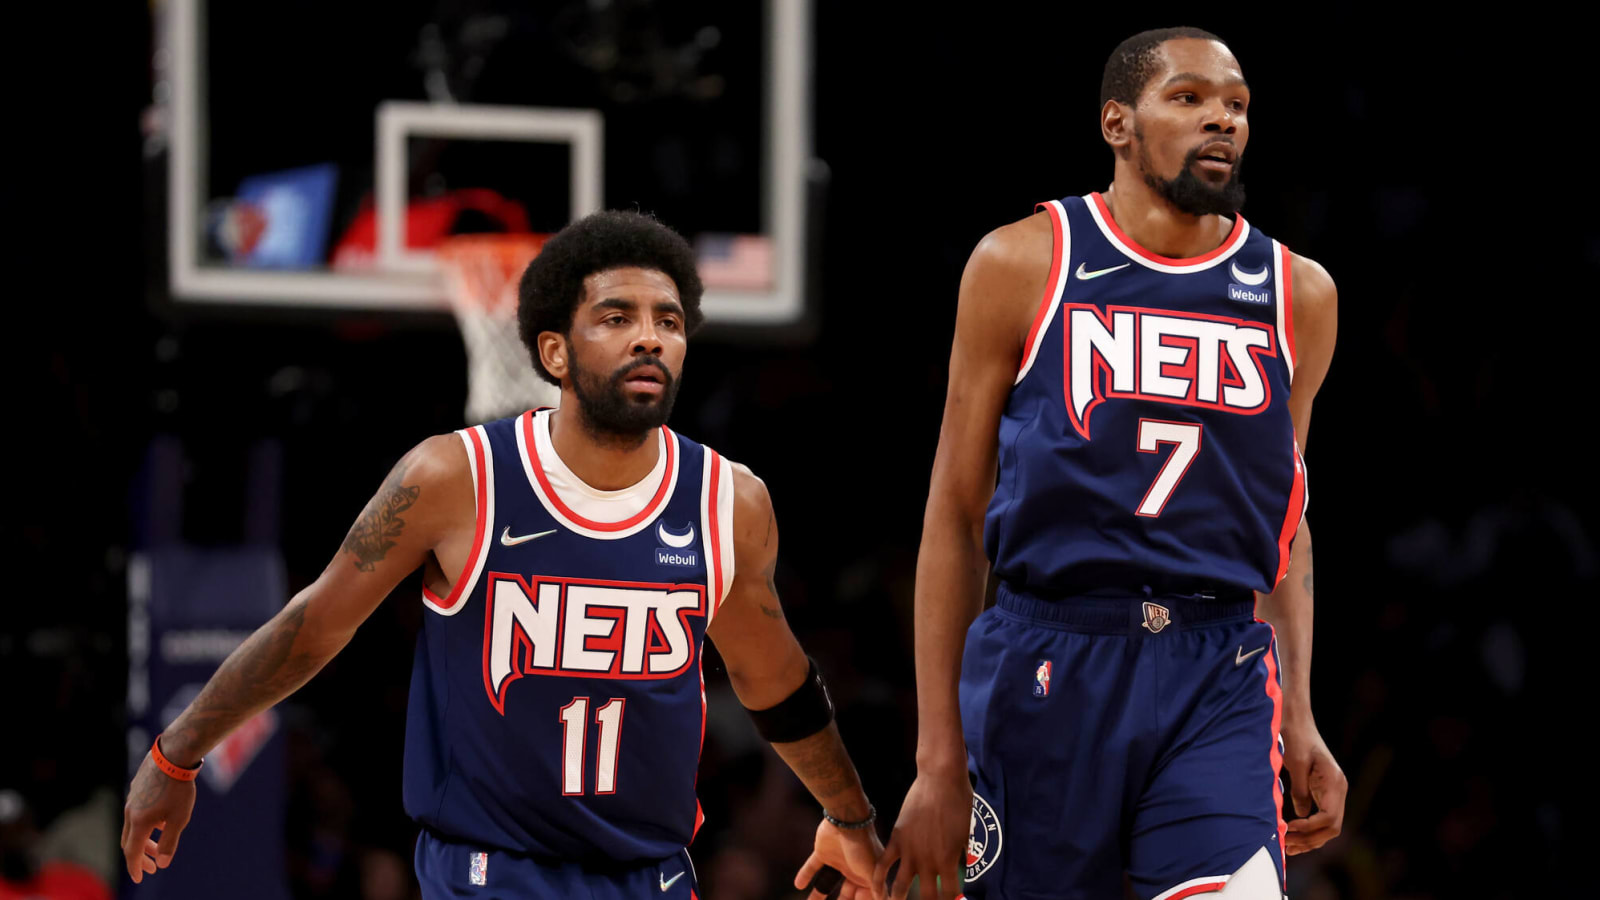 Report: Nets' outlook with Irving, Durant remains 'murky'